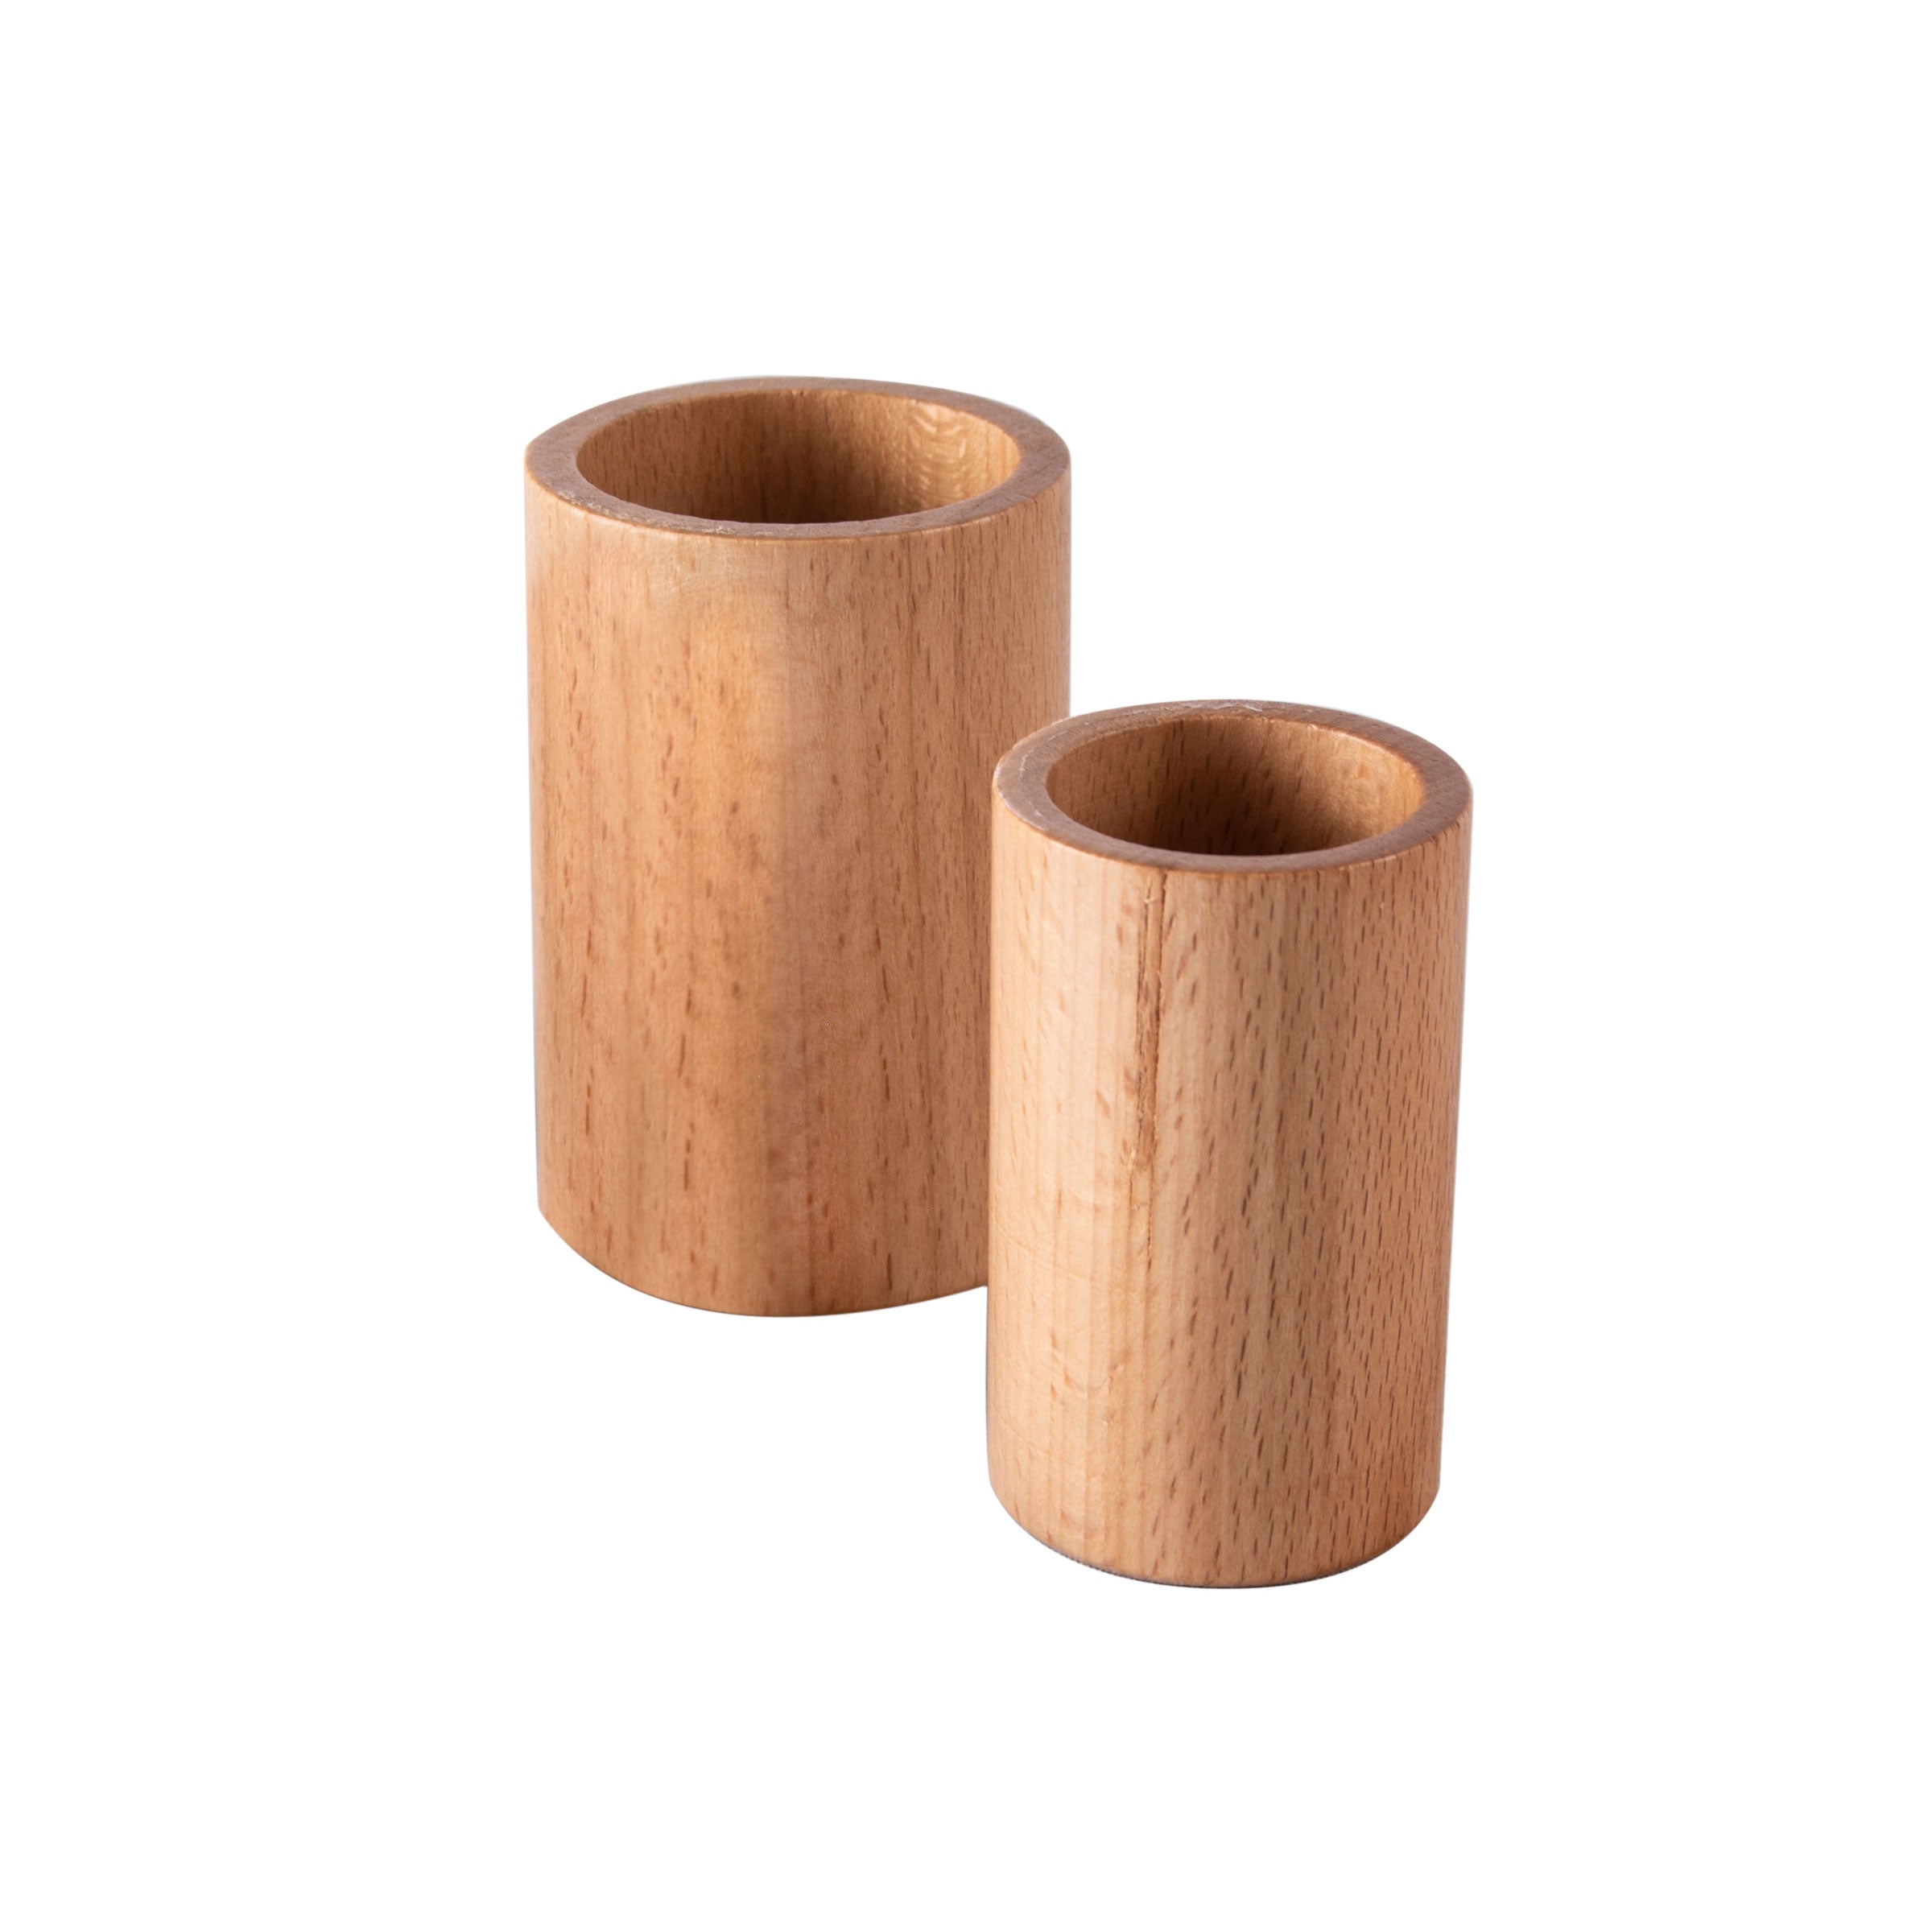 Grapat - Natural Wooden Sorting Cups with Lids